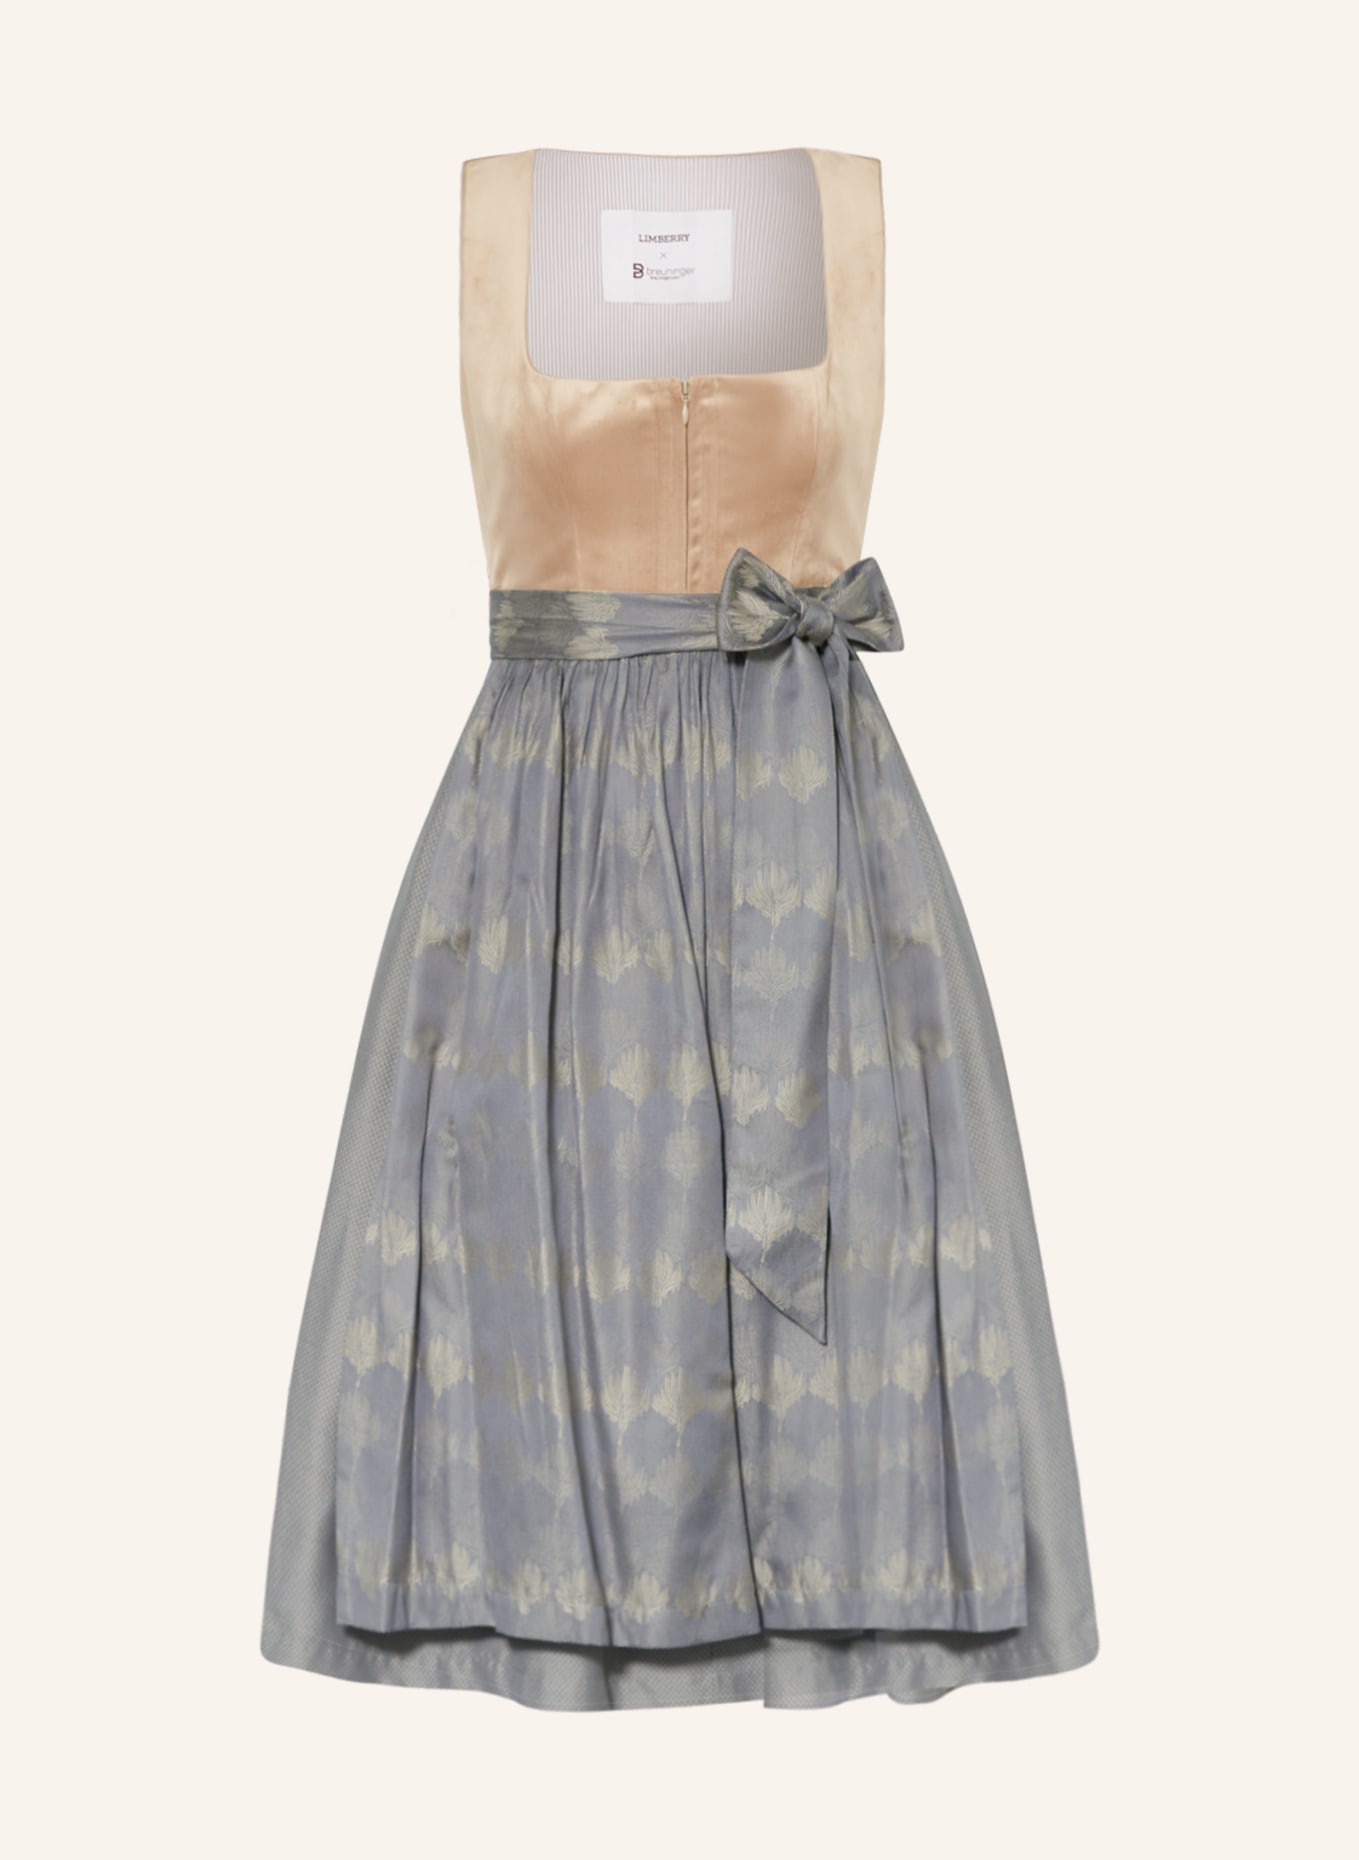 LIMBERRY Dirndl MINA, Color: TAUPE/ BEIGE/ GRAY (Image 1)